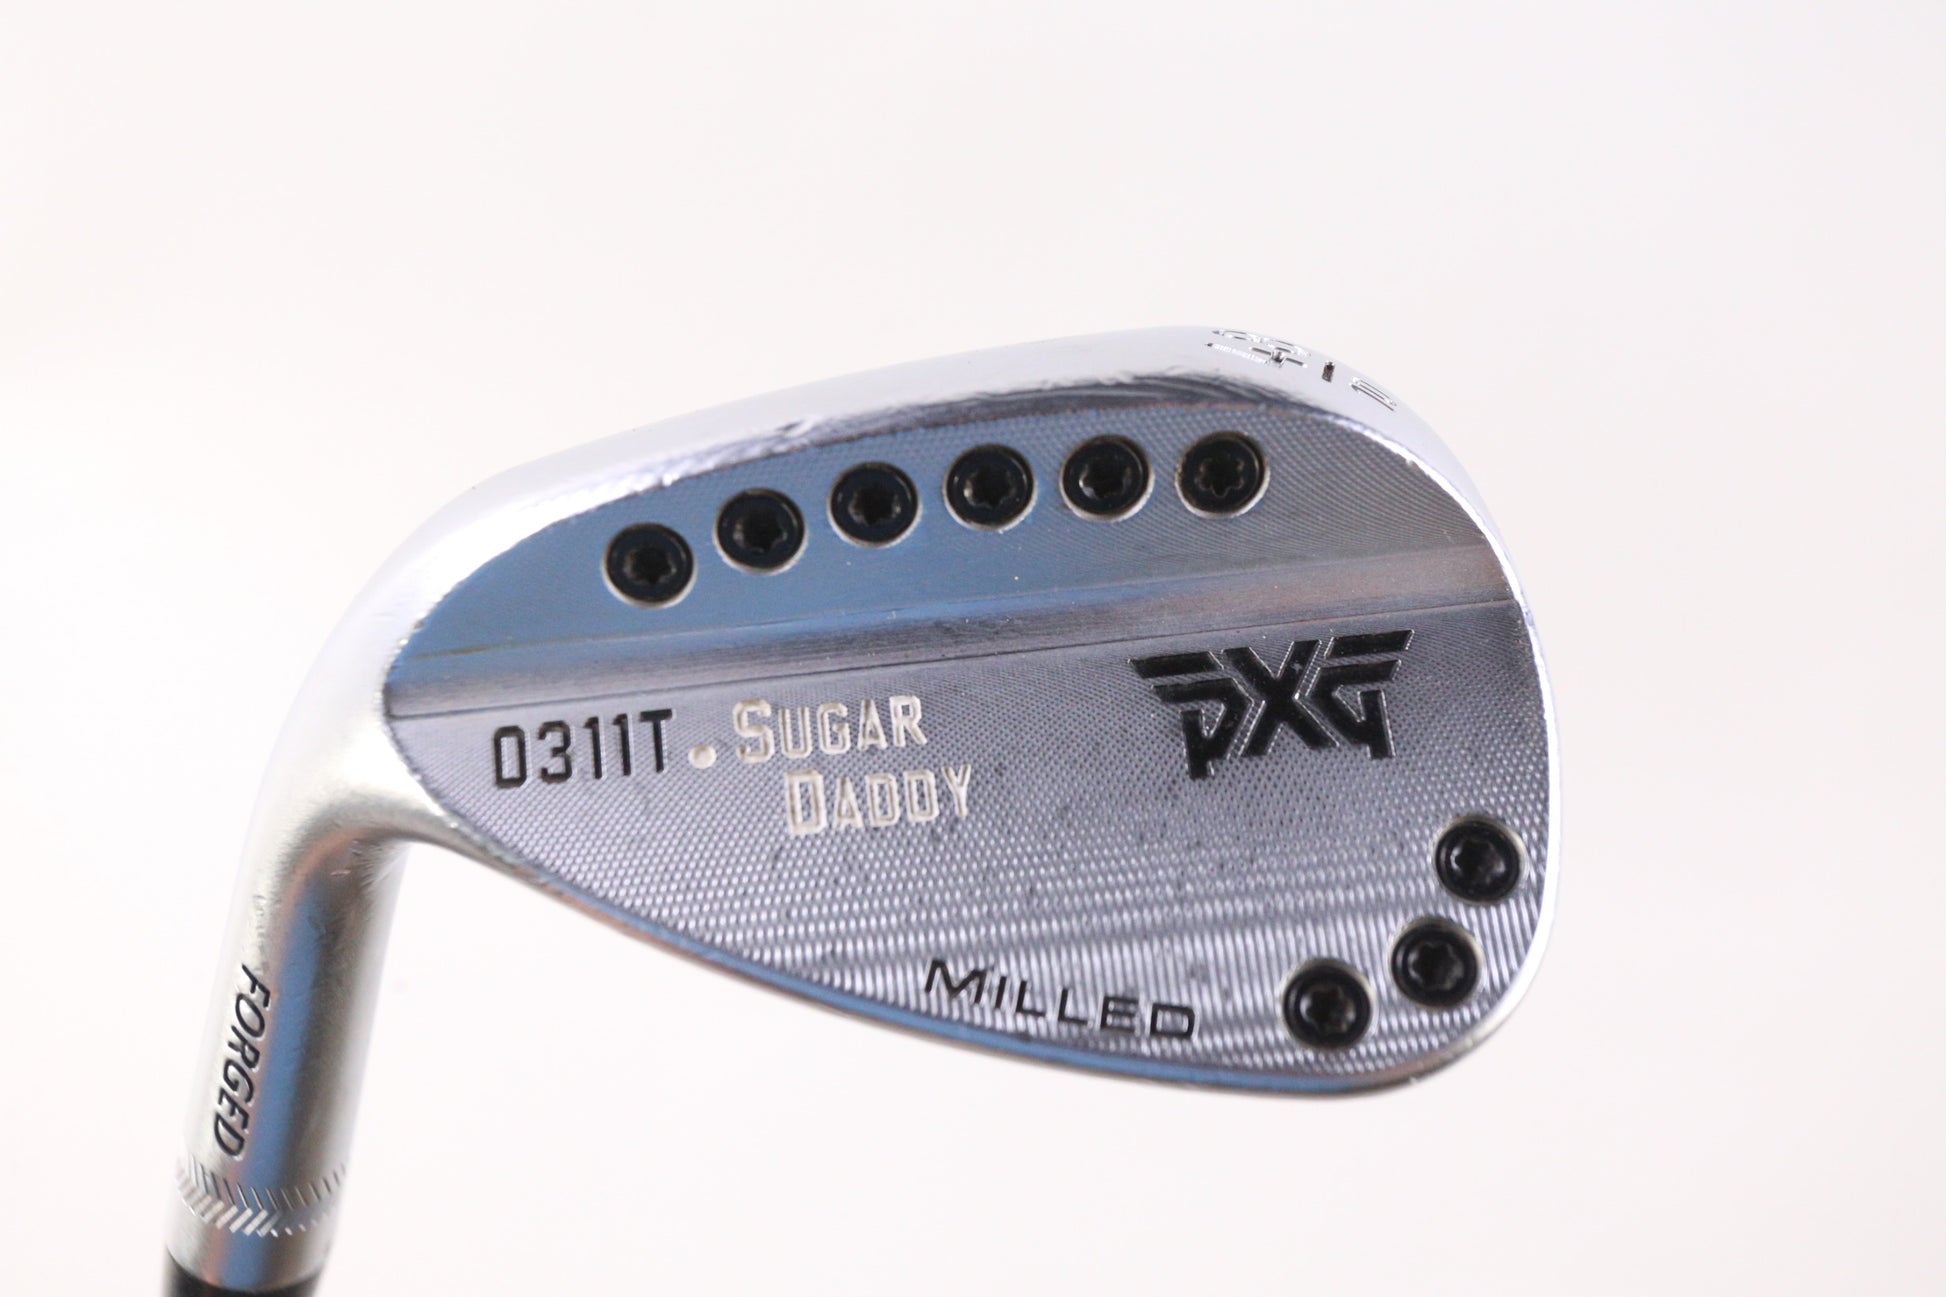 Used PXG 0311T Sugar Daddy Pitching Wedge - Left-Handed - 48 Degrees - Extra Stiff Flex-Next Round